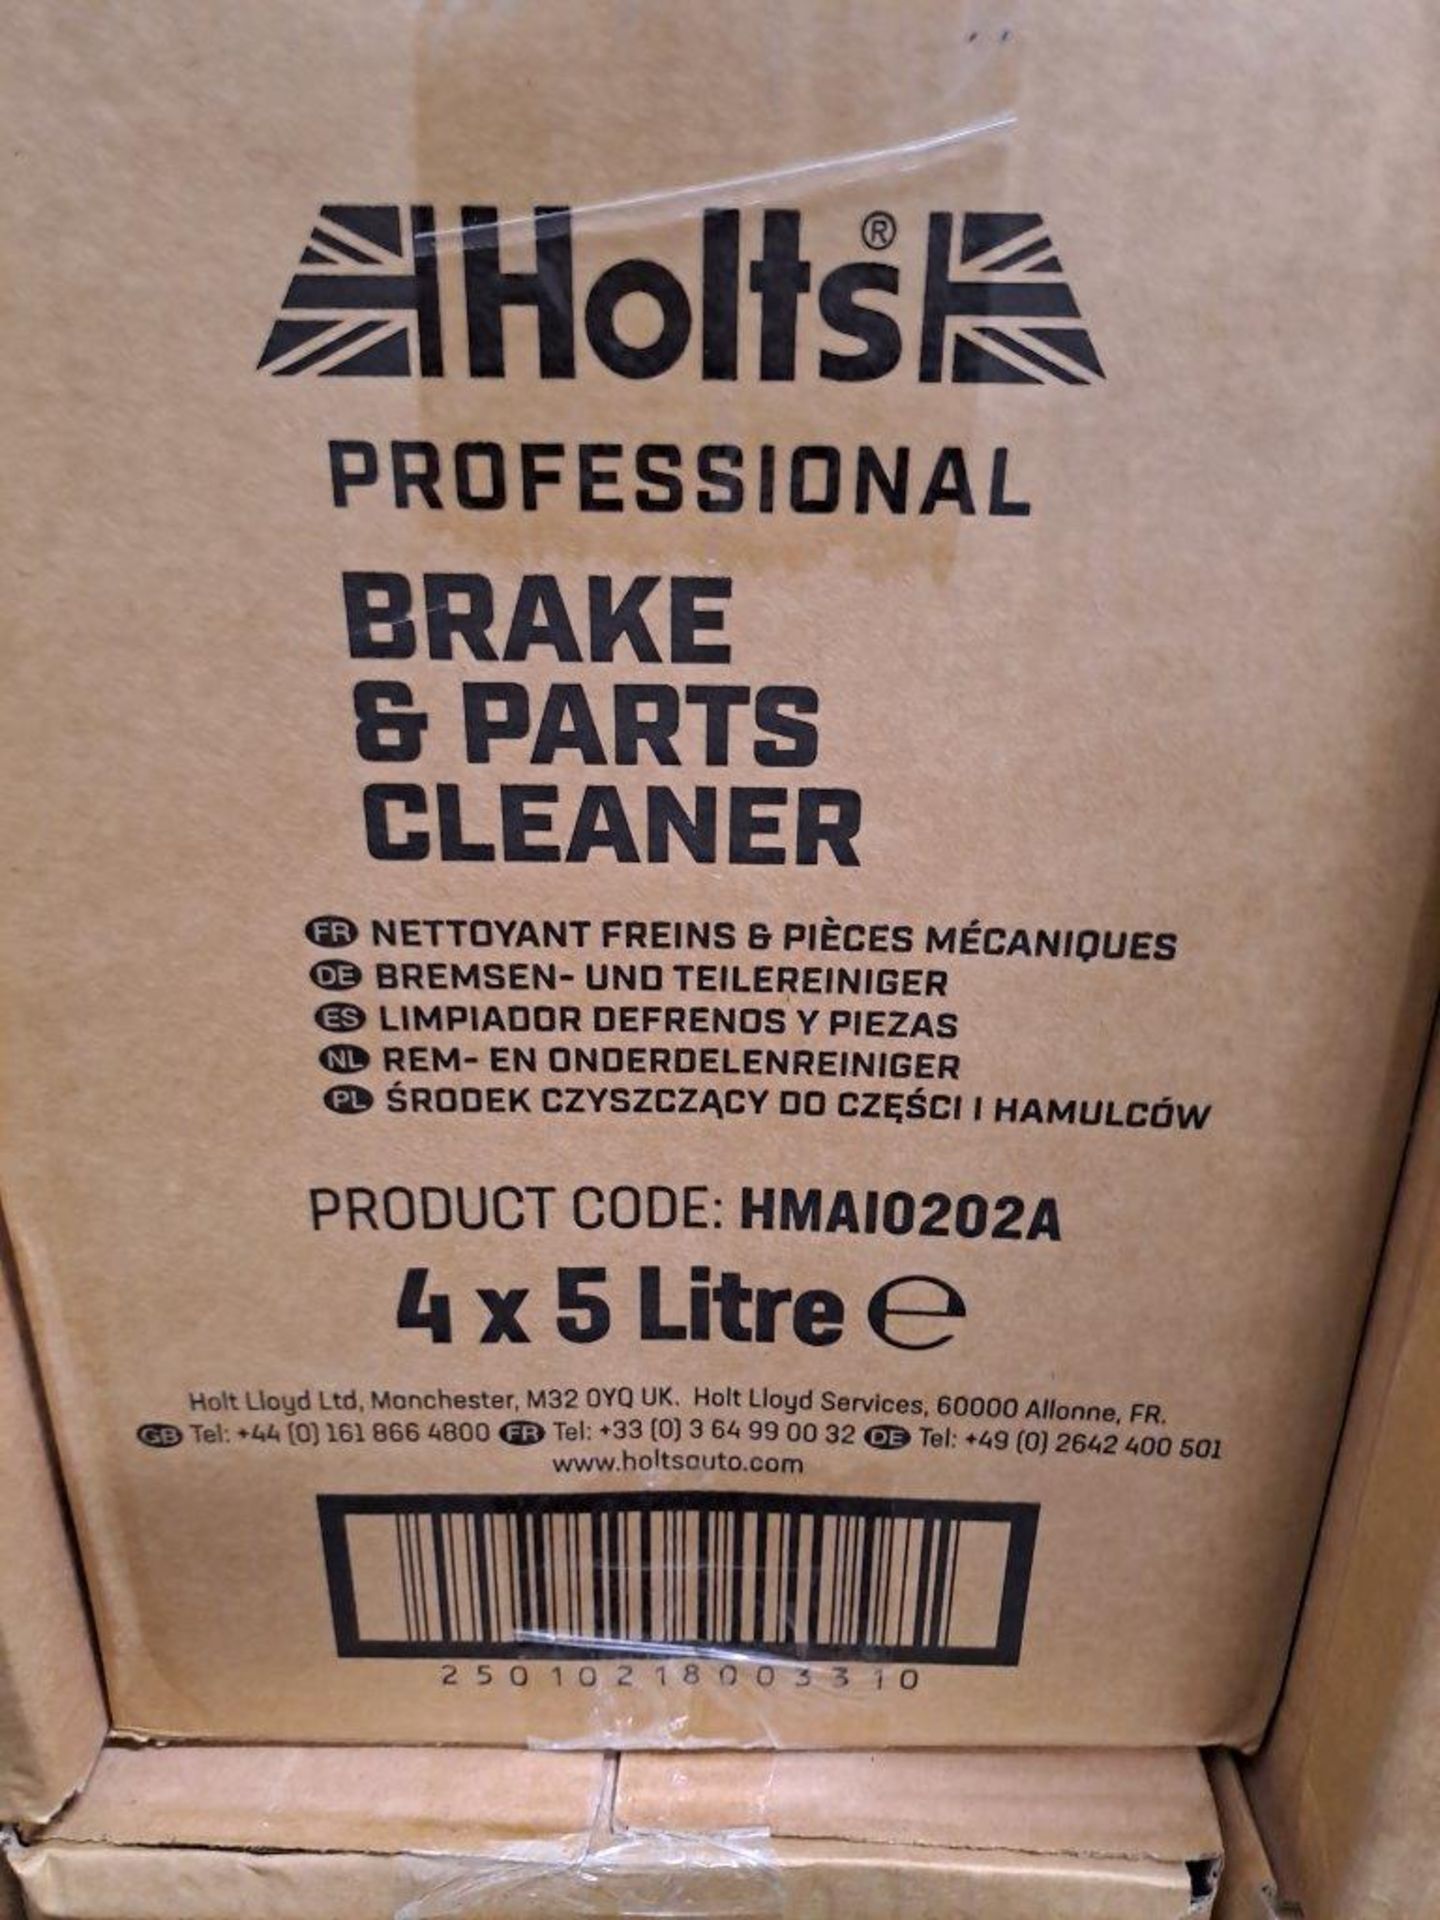 Holts 8 x 5 Litre Brake and Parts Cleaner - Image 2 of 4